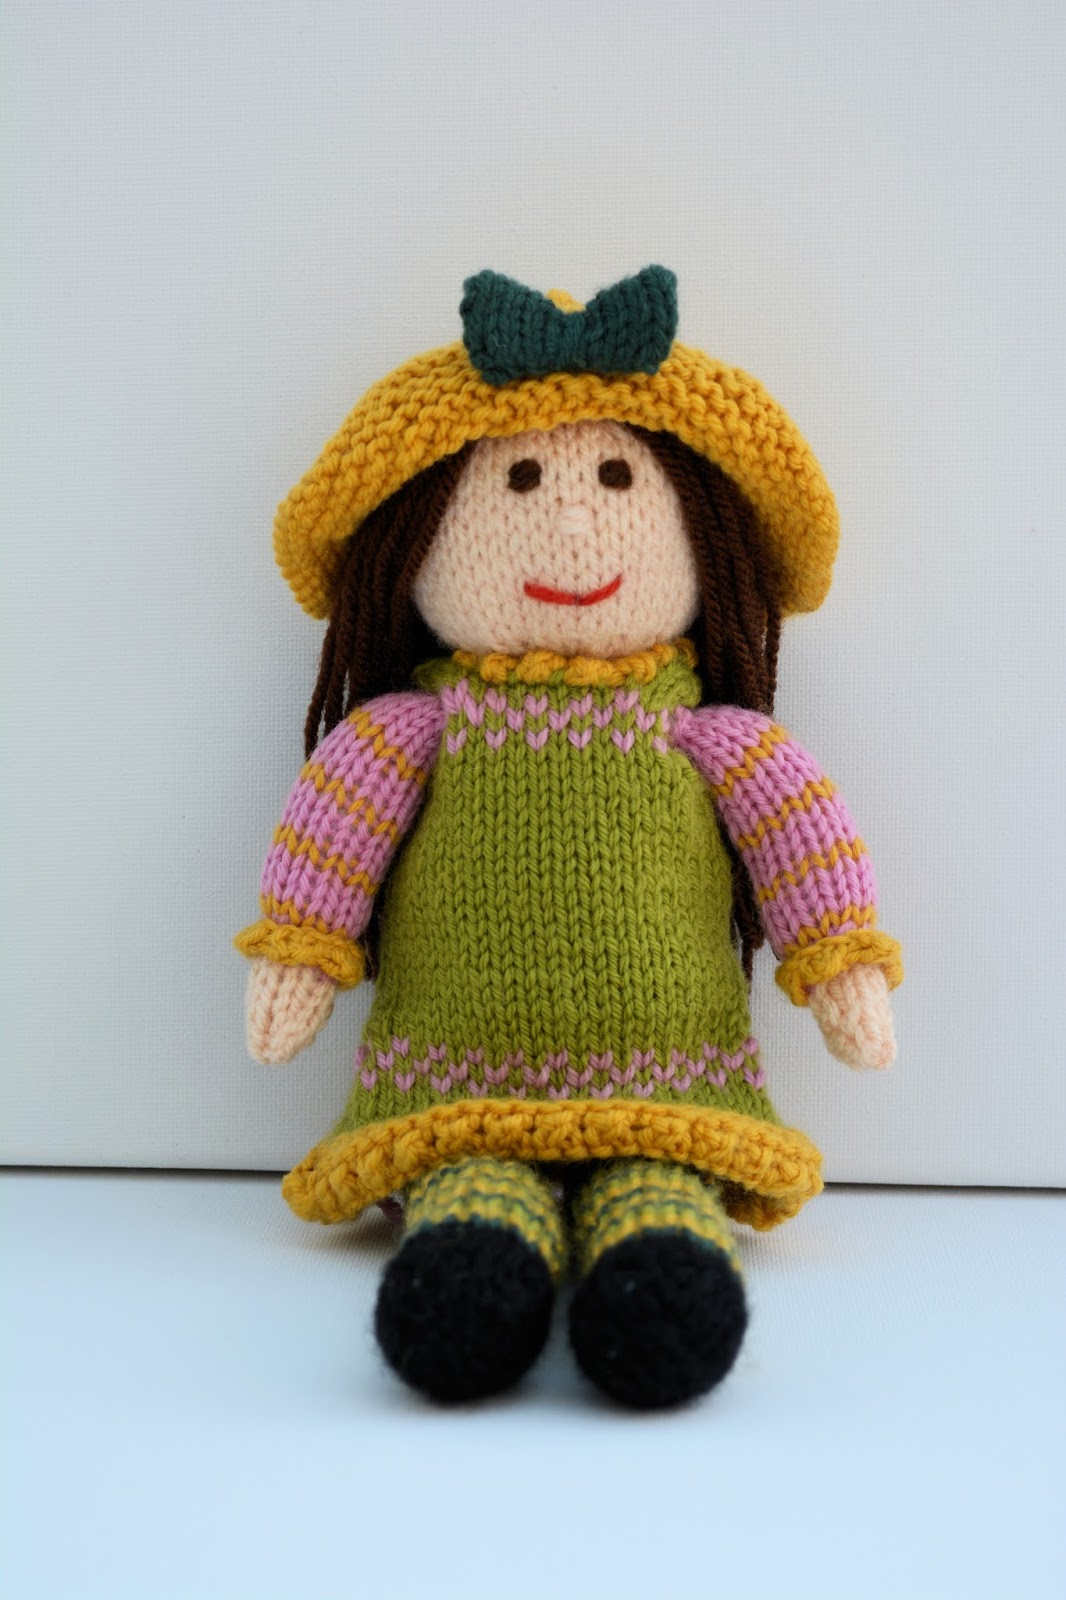 Edith Grace Designs: Tulip - A Spring Doll Knitting Pattern